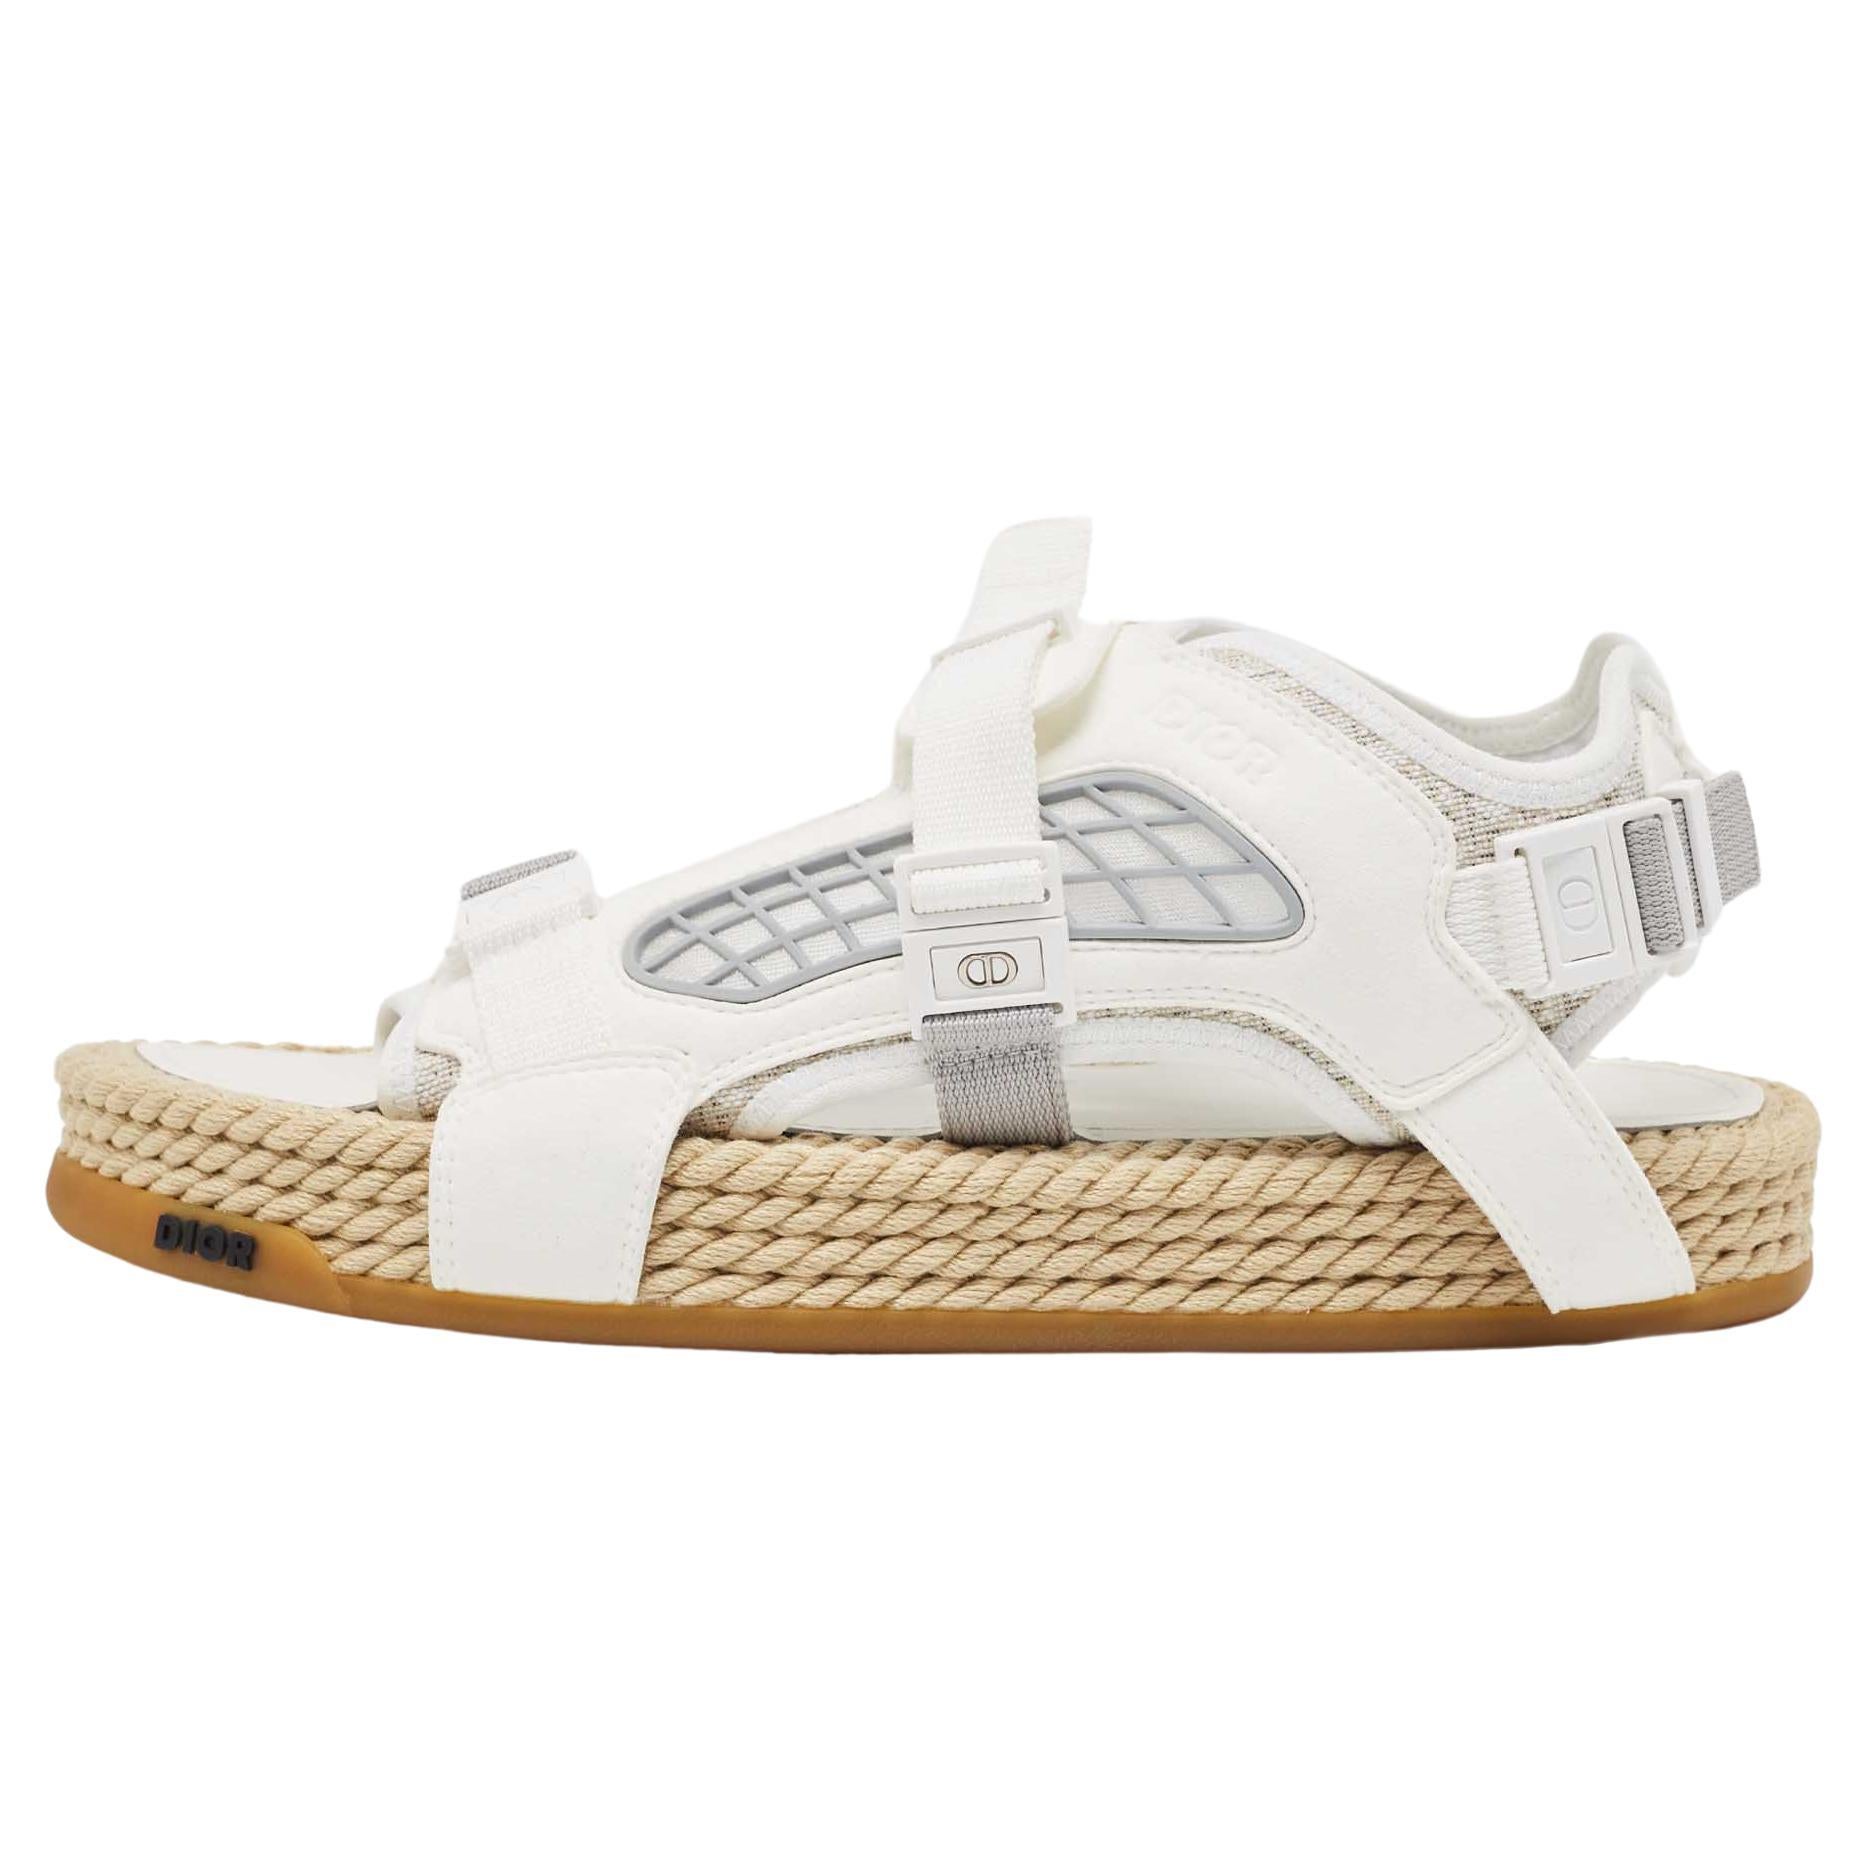 Dior White Canvas and Suede Atlas Sandals Size 41